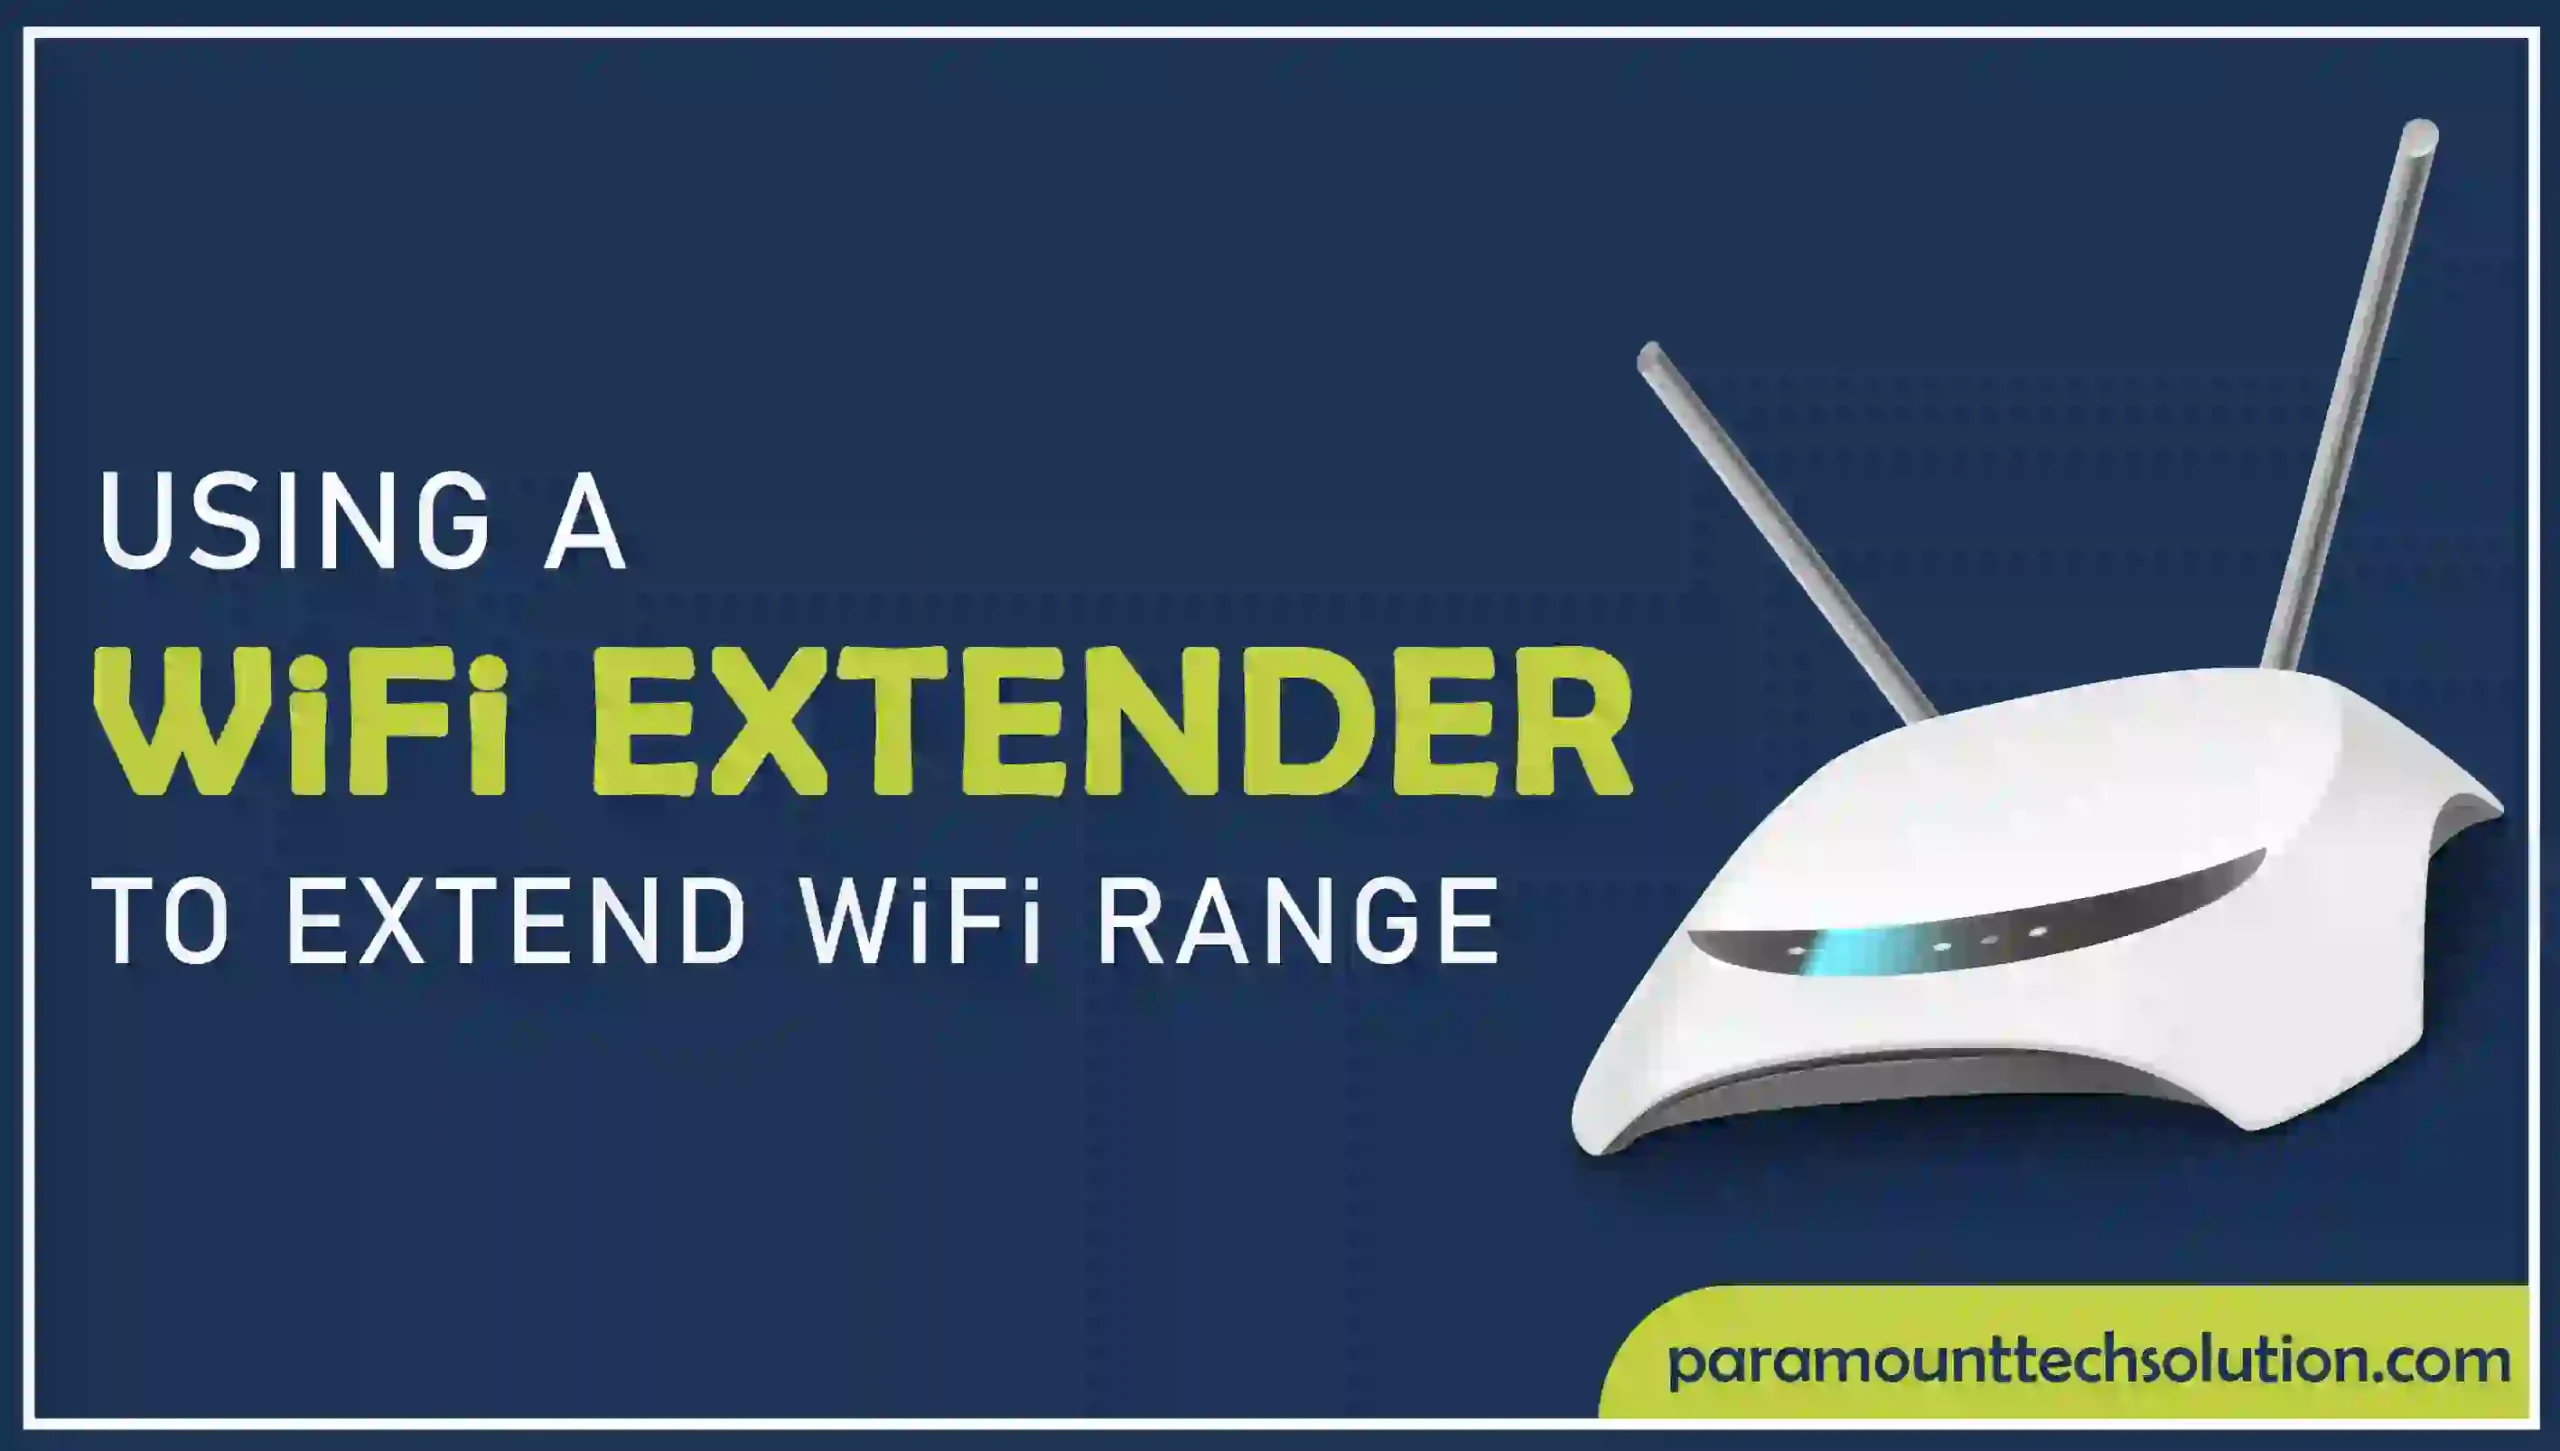 WiFi Extender To Extend the Wi-Fi Range and the git rid of weak wifi signal